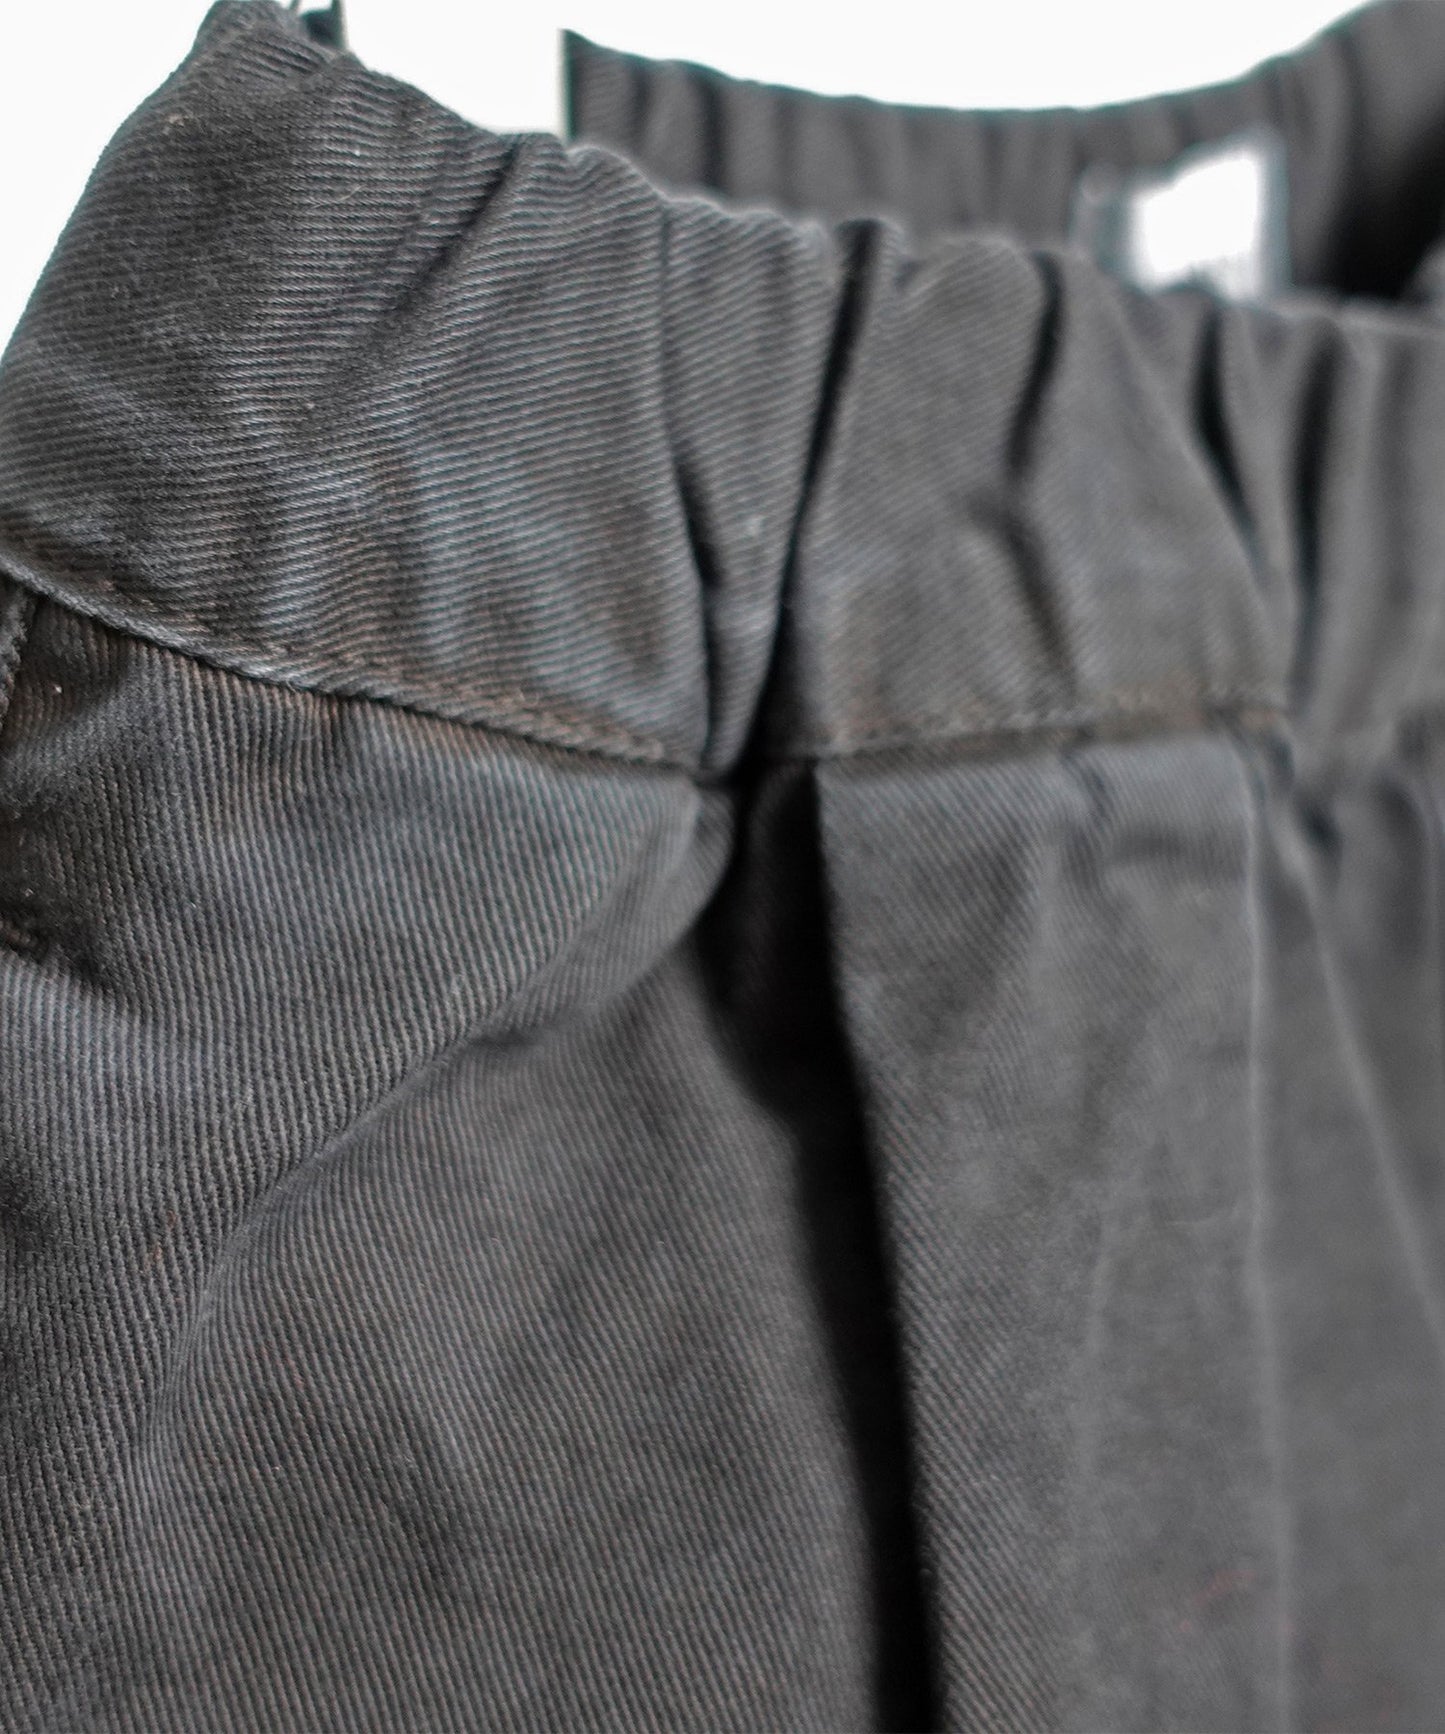 [Environmentally friendly material] OG G/D NEUTRAL SHORTS Organic cotton Product dyed All season material [100-145cm]